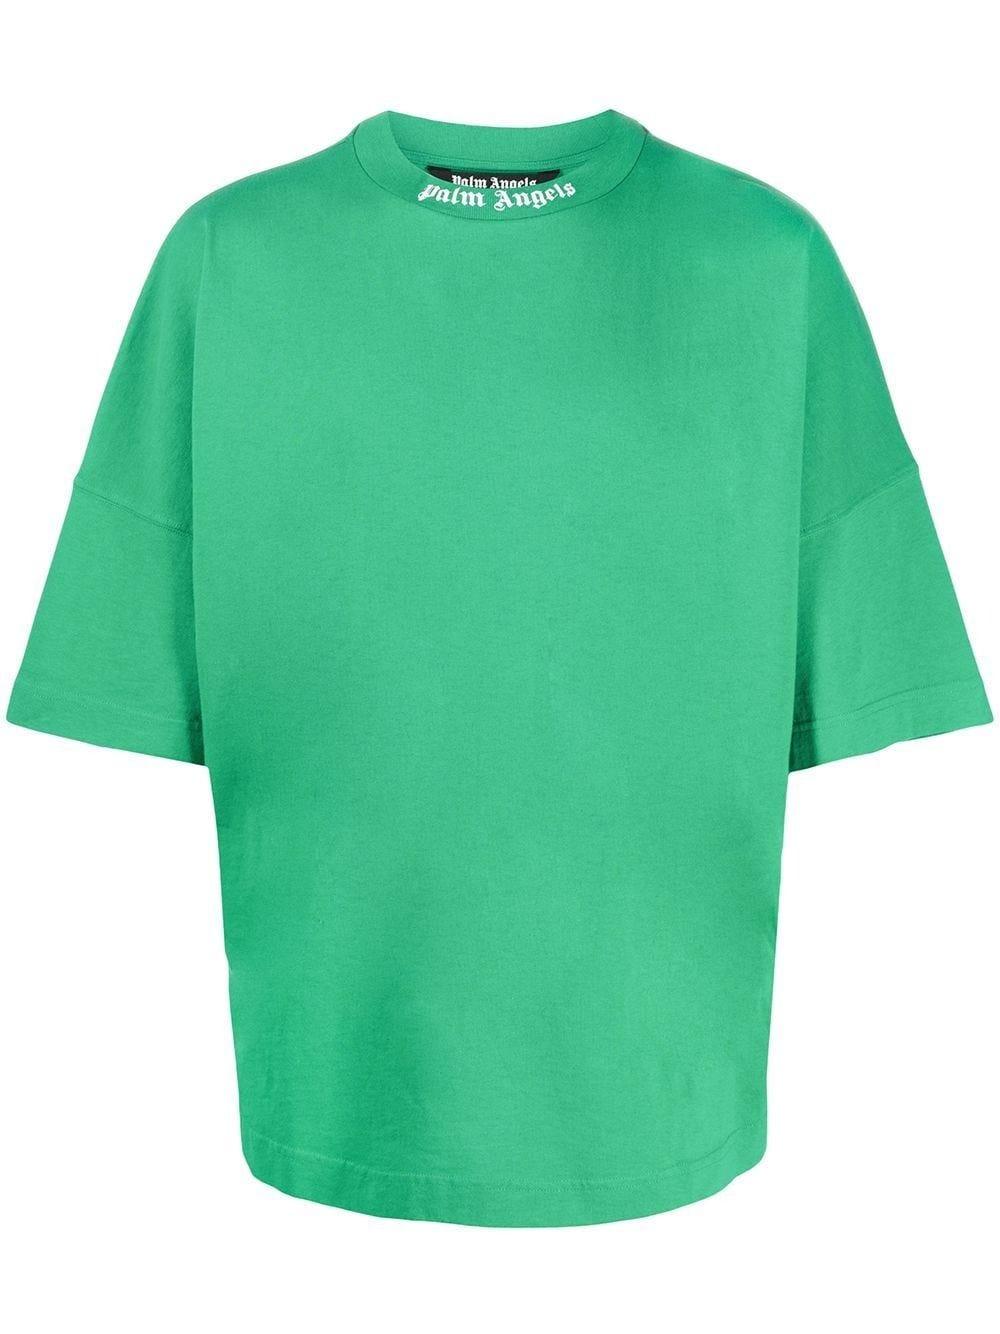 Palm Angels Rear Logo Print T-shirt in Green for Men